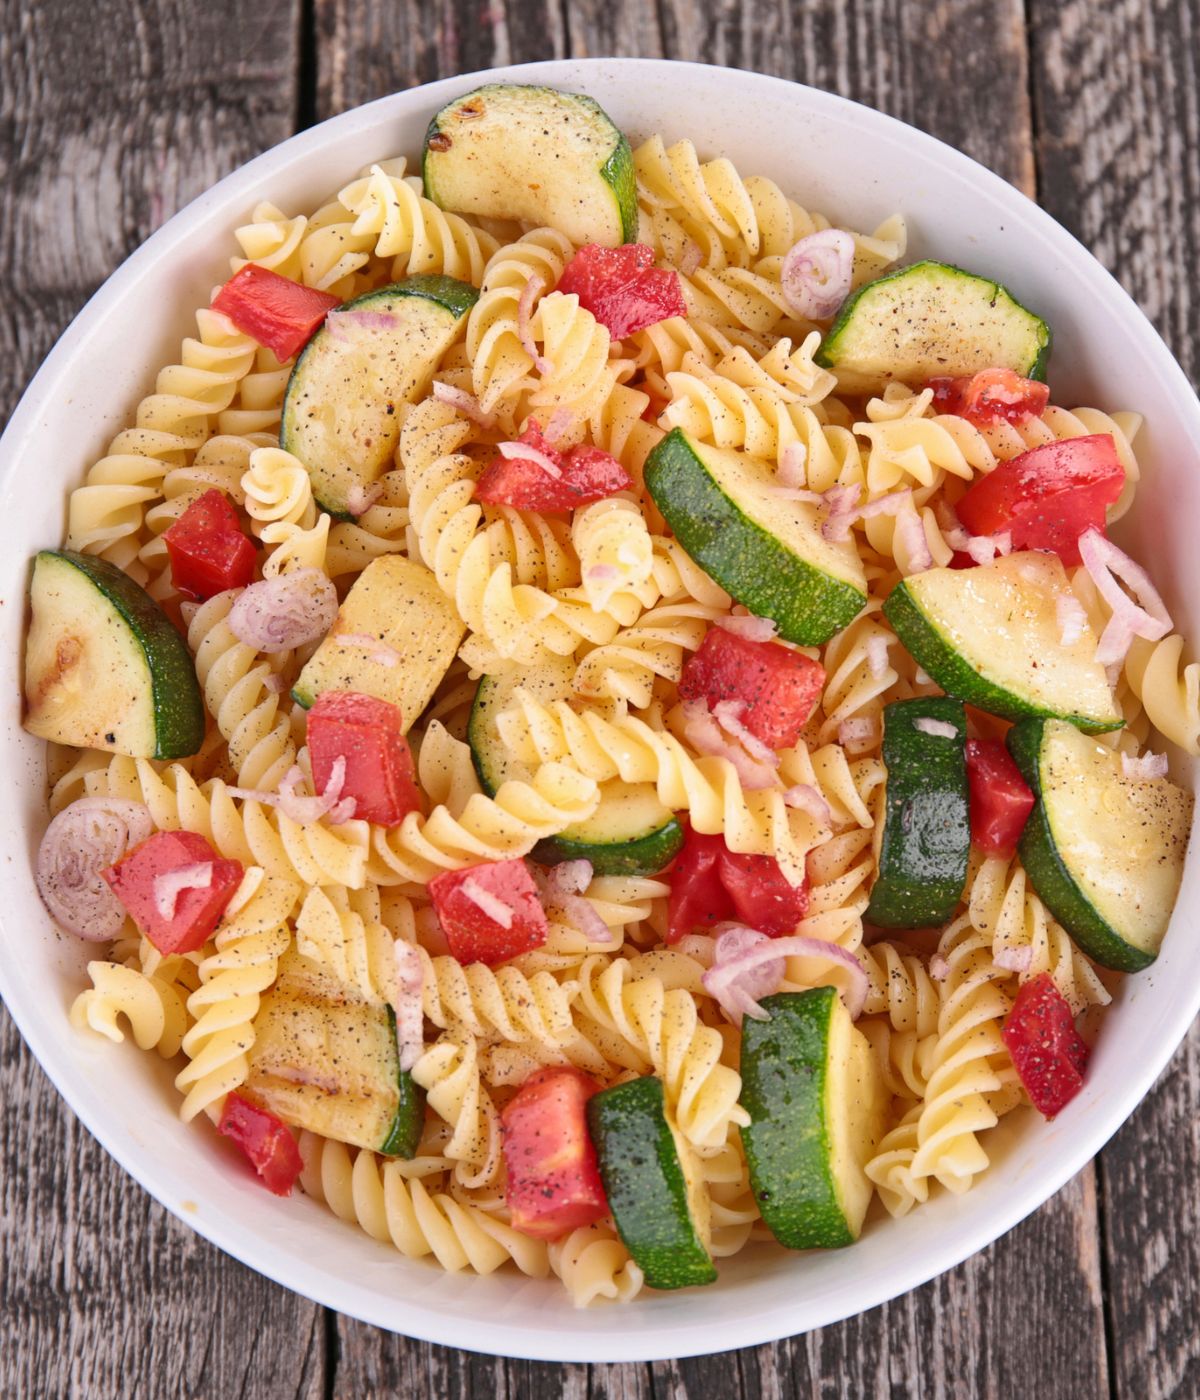 Pasta salad with veggies in a bowl.